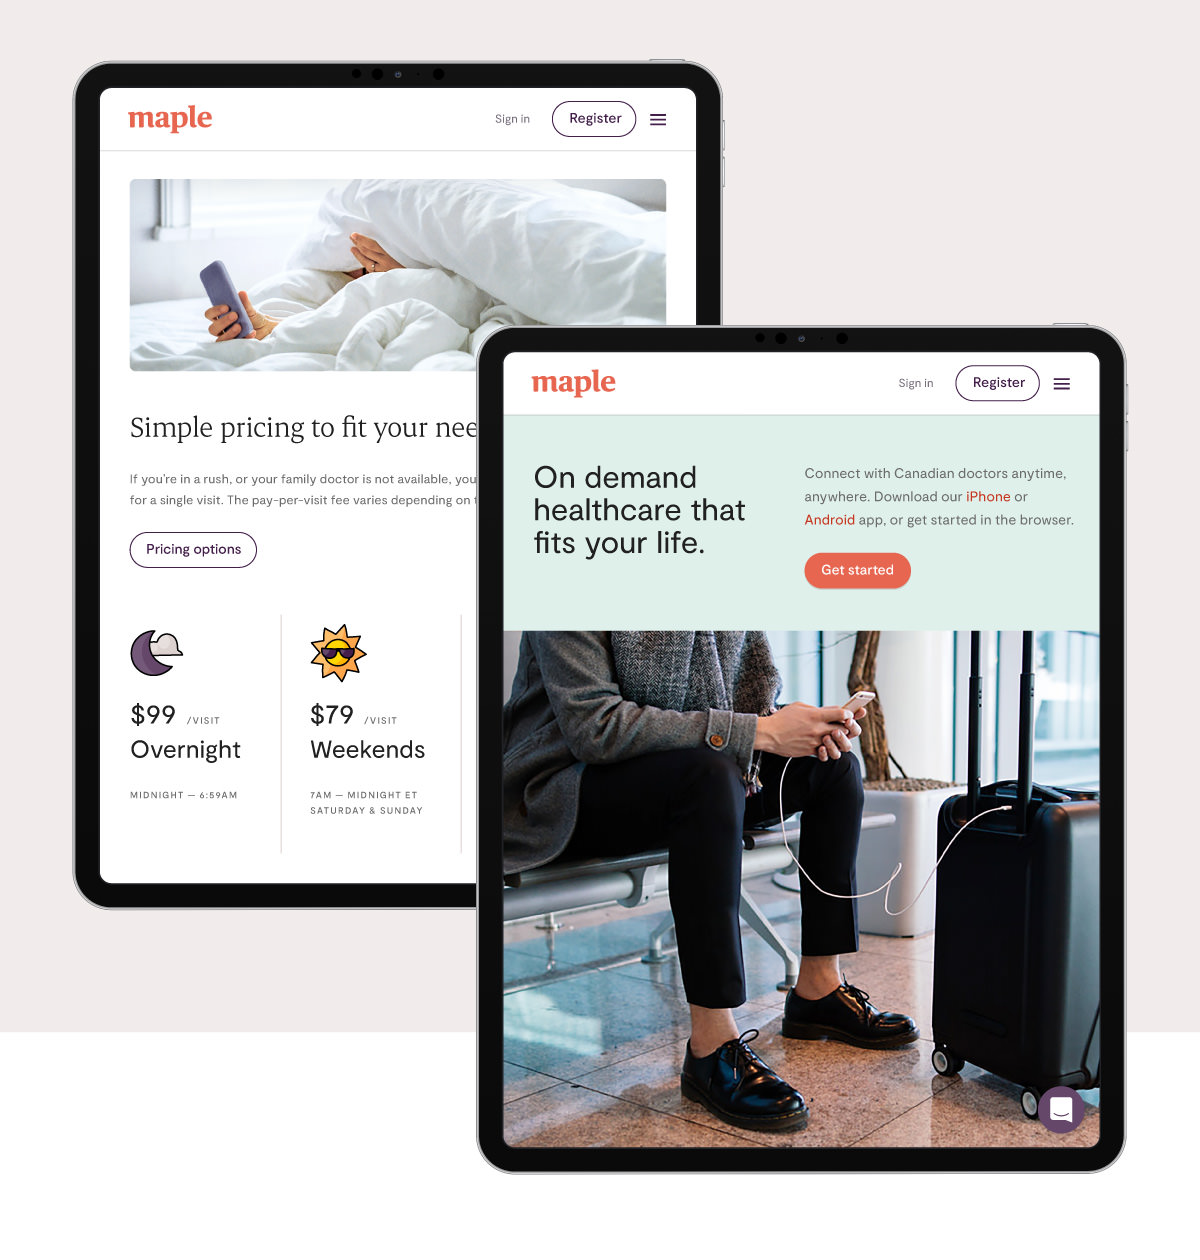 Responsive web design for Maple showcasing photography, icon design, and brand colour palette displayed on two iPad devices